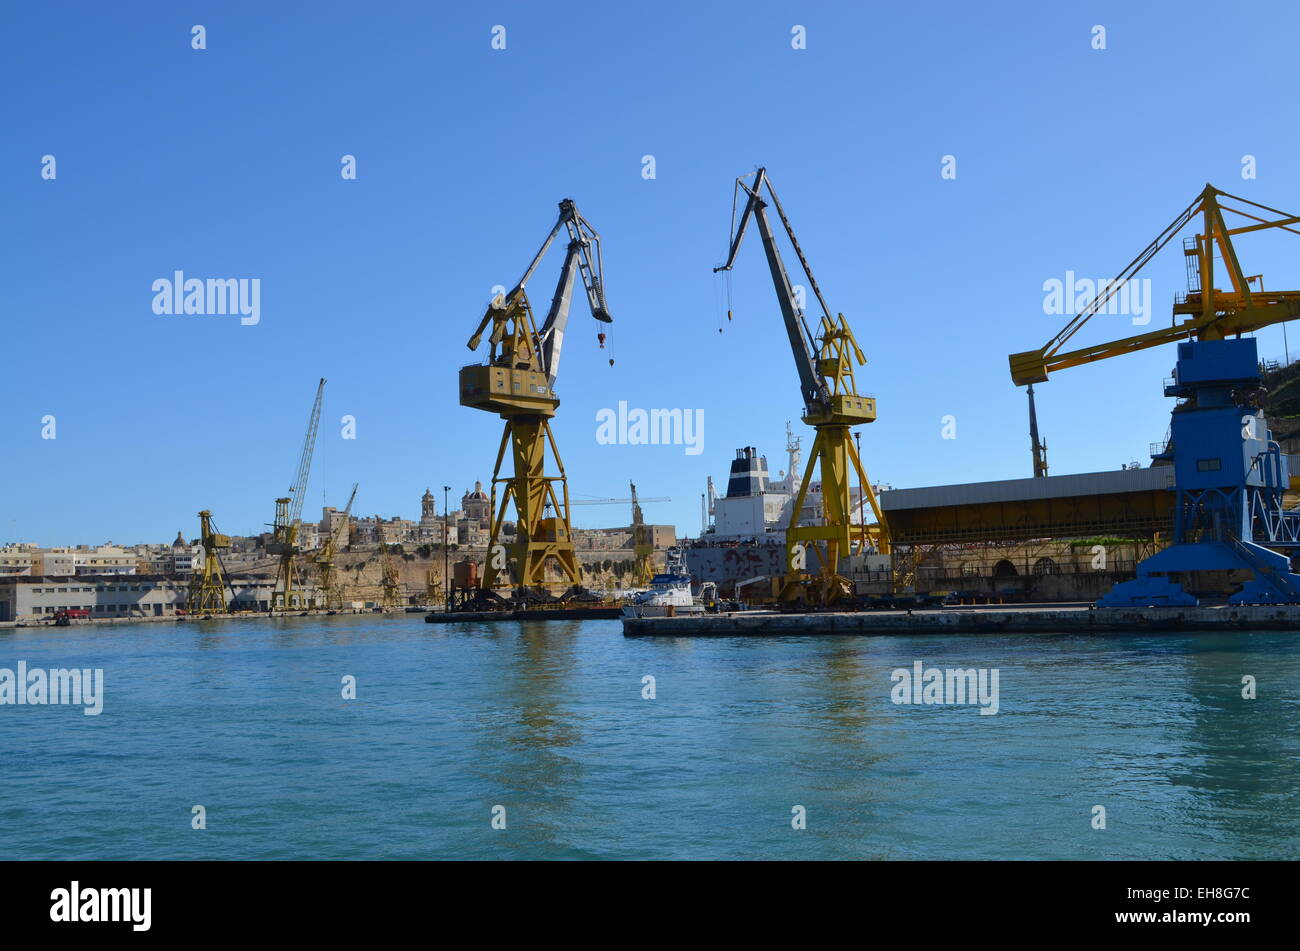 Continuing the trip around the Harbour of Malta we pass Two cranes busy unloading some goods for the harbour.. Stock Photo